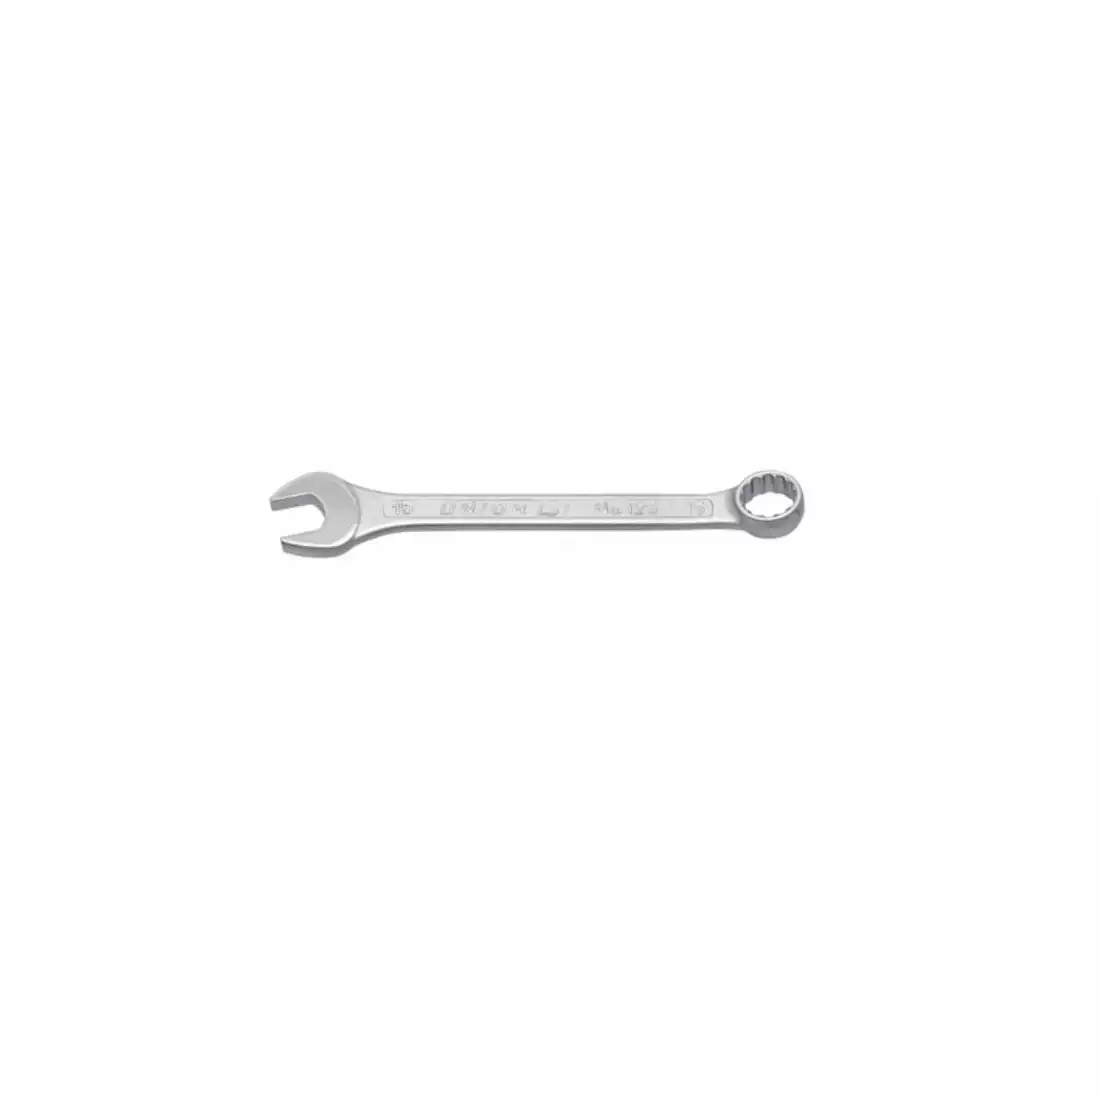 UNIOR combination wrench, short type 15 mm